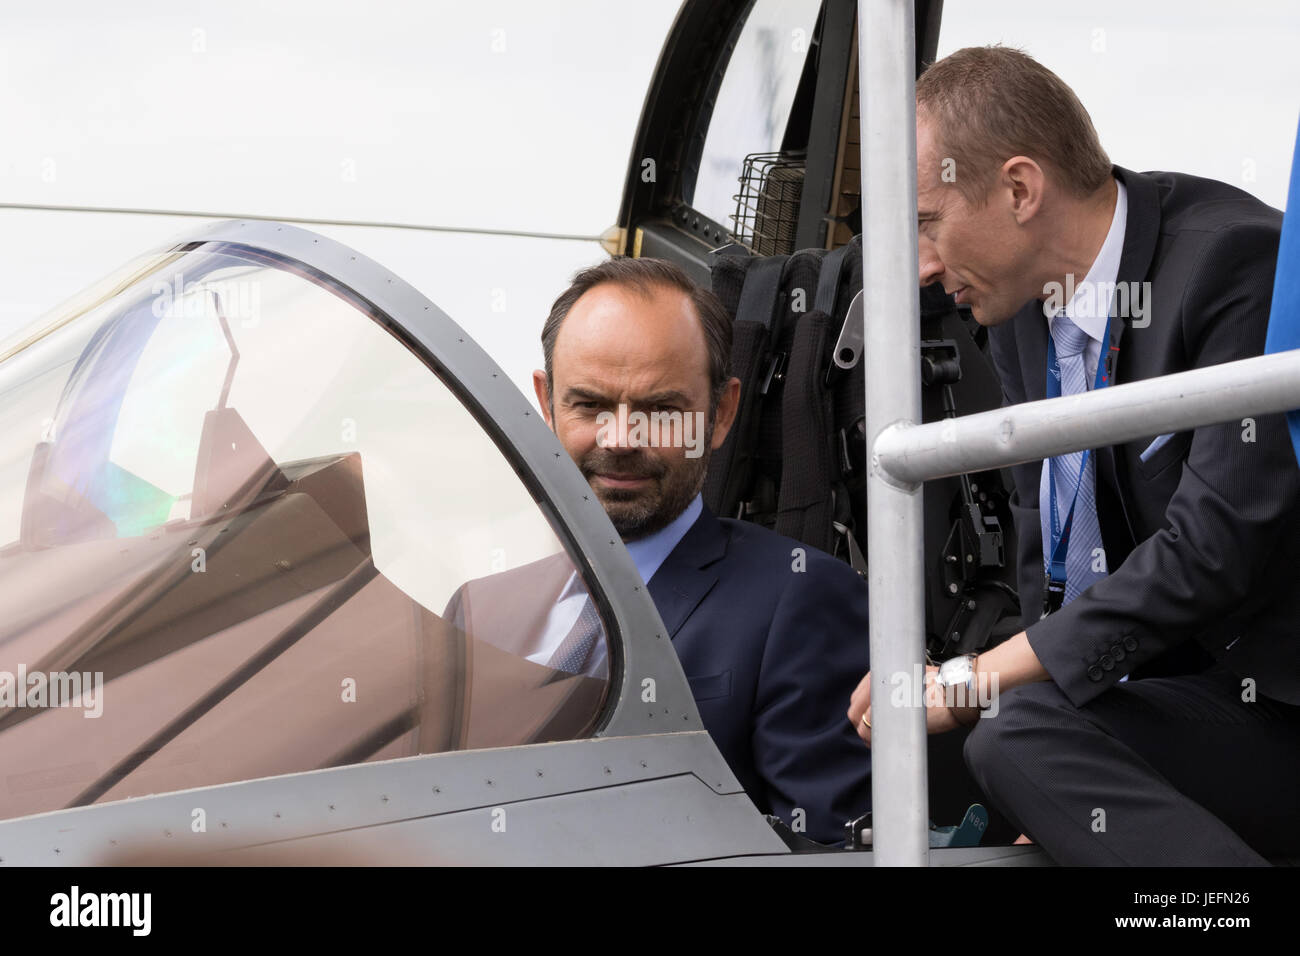 PARIS, FRANCE - JUN 23, 2017: French Prime Minister Edouard Philippe in the cockpit of a Rafale fighter jet during a visit to the Dassault company at  Stock Photo